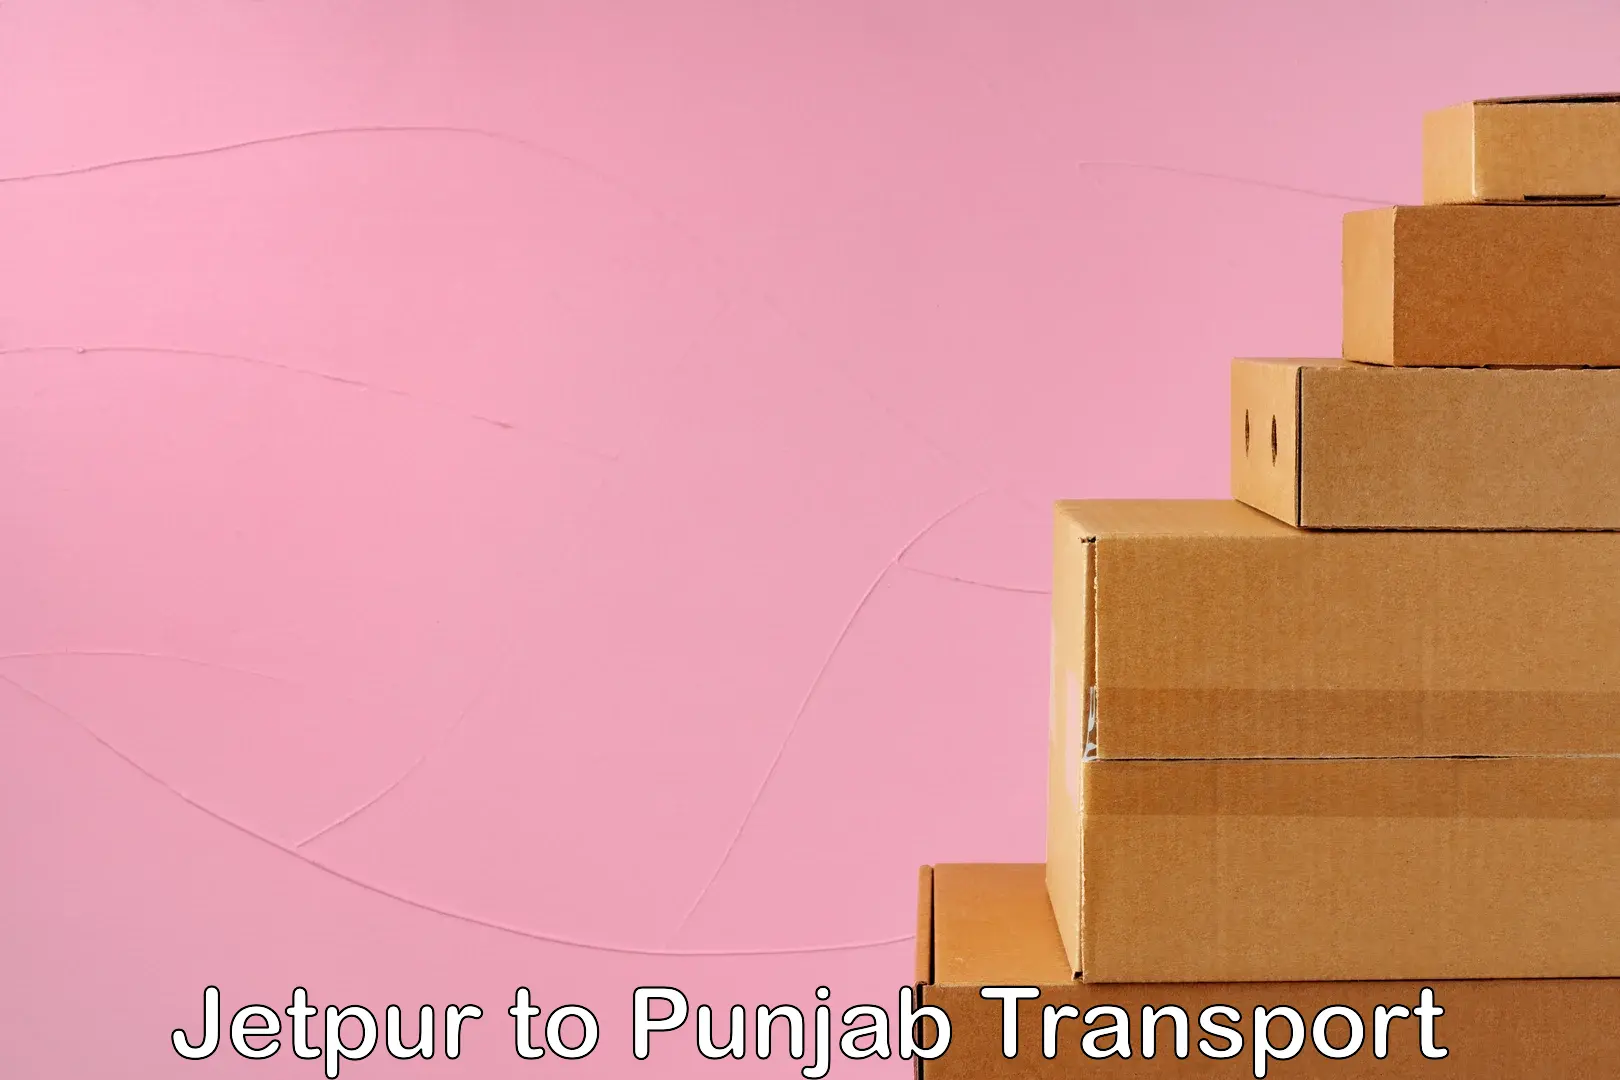 Truck transport companies in India Jetpur to Mansa